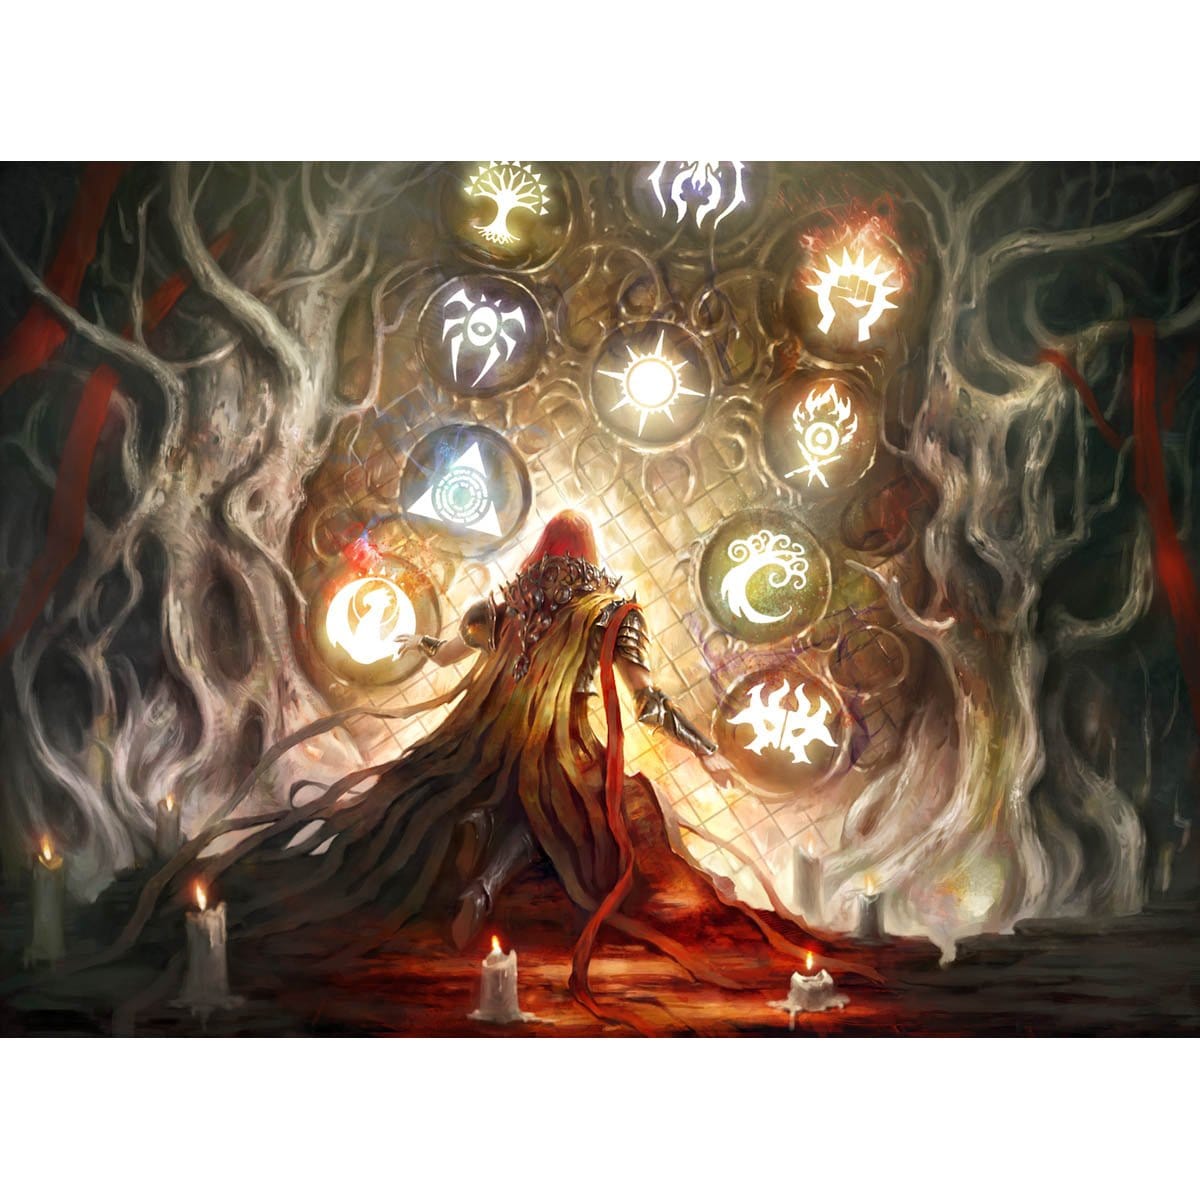 Awe for the Guilds Print - Print - Original Magic Art - Accessories for Magic the Gathering and other card games